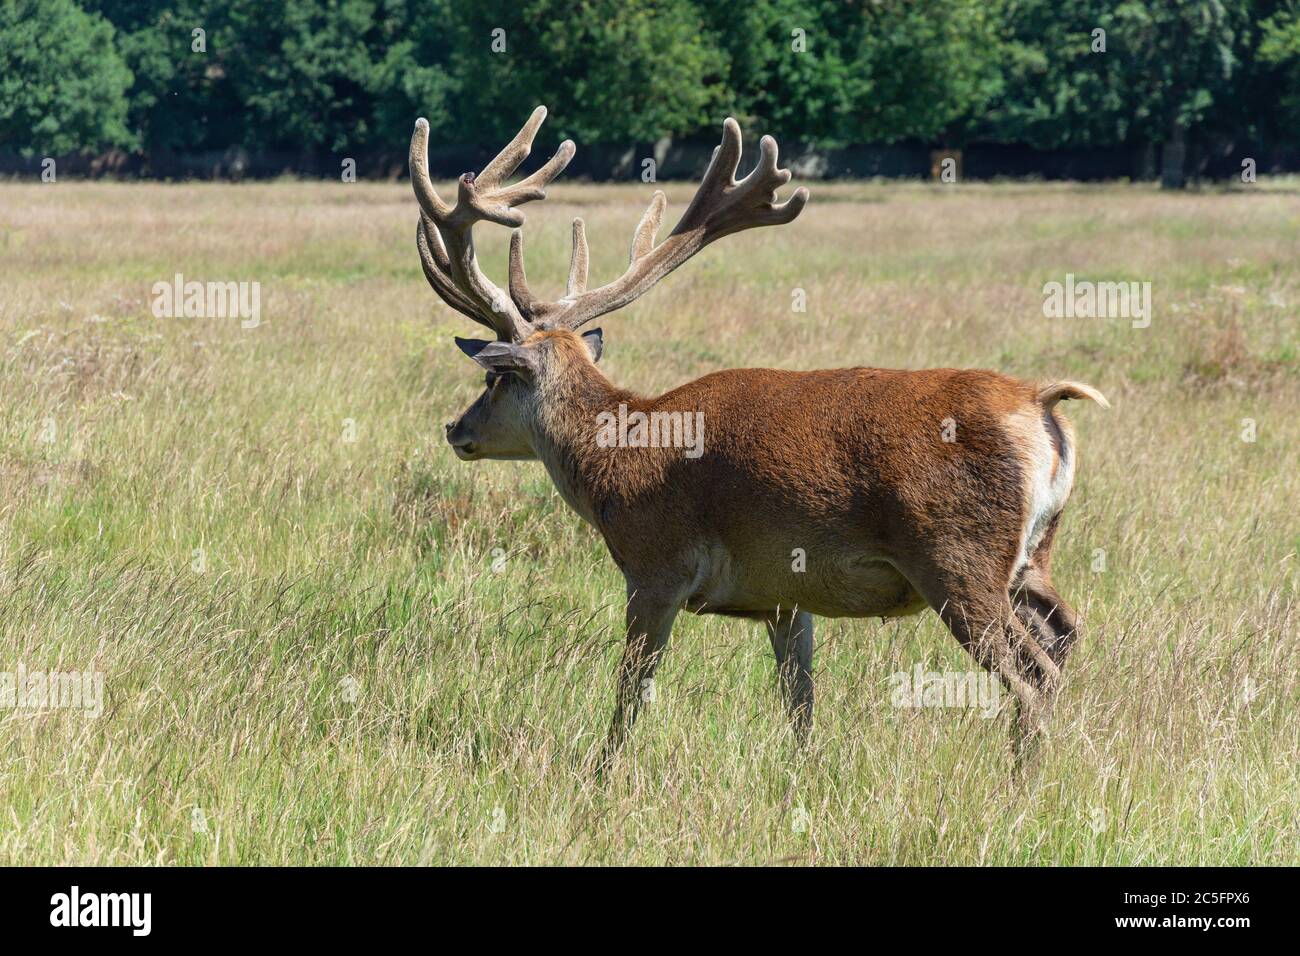 Red deer stag in Bushy Park, Borough of Richmond upon Thames, Greater London, England, United Kingdom Stock Photo